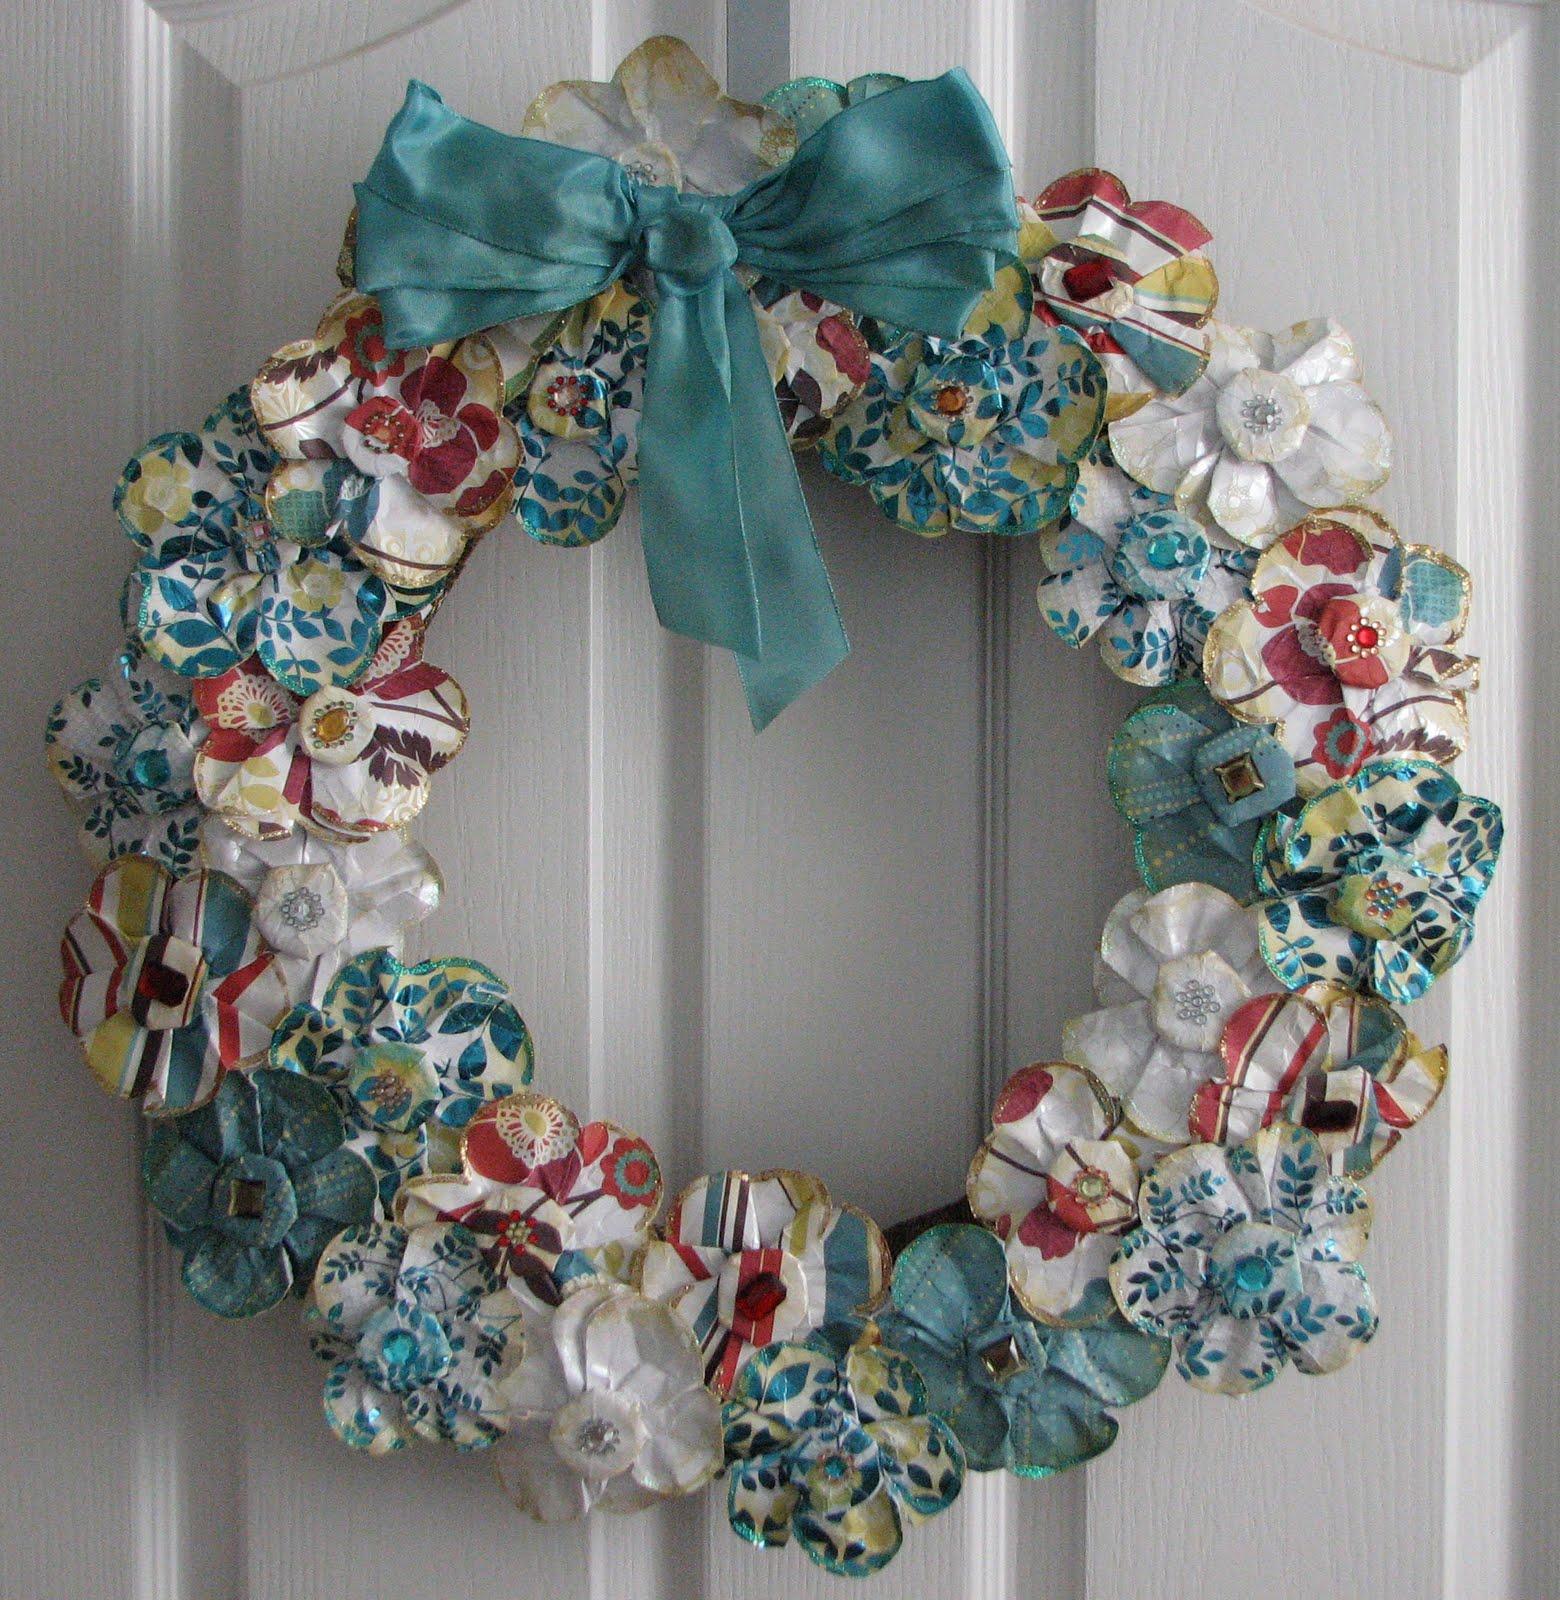 Hilarious Wreath Decorations Wreath Decorations Happy To Fashionable